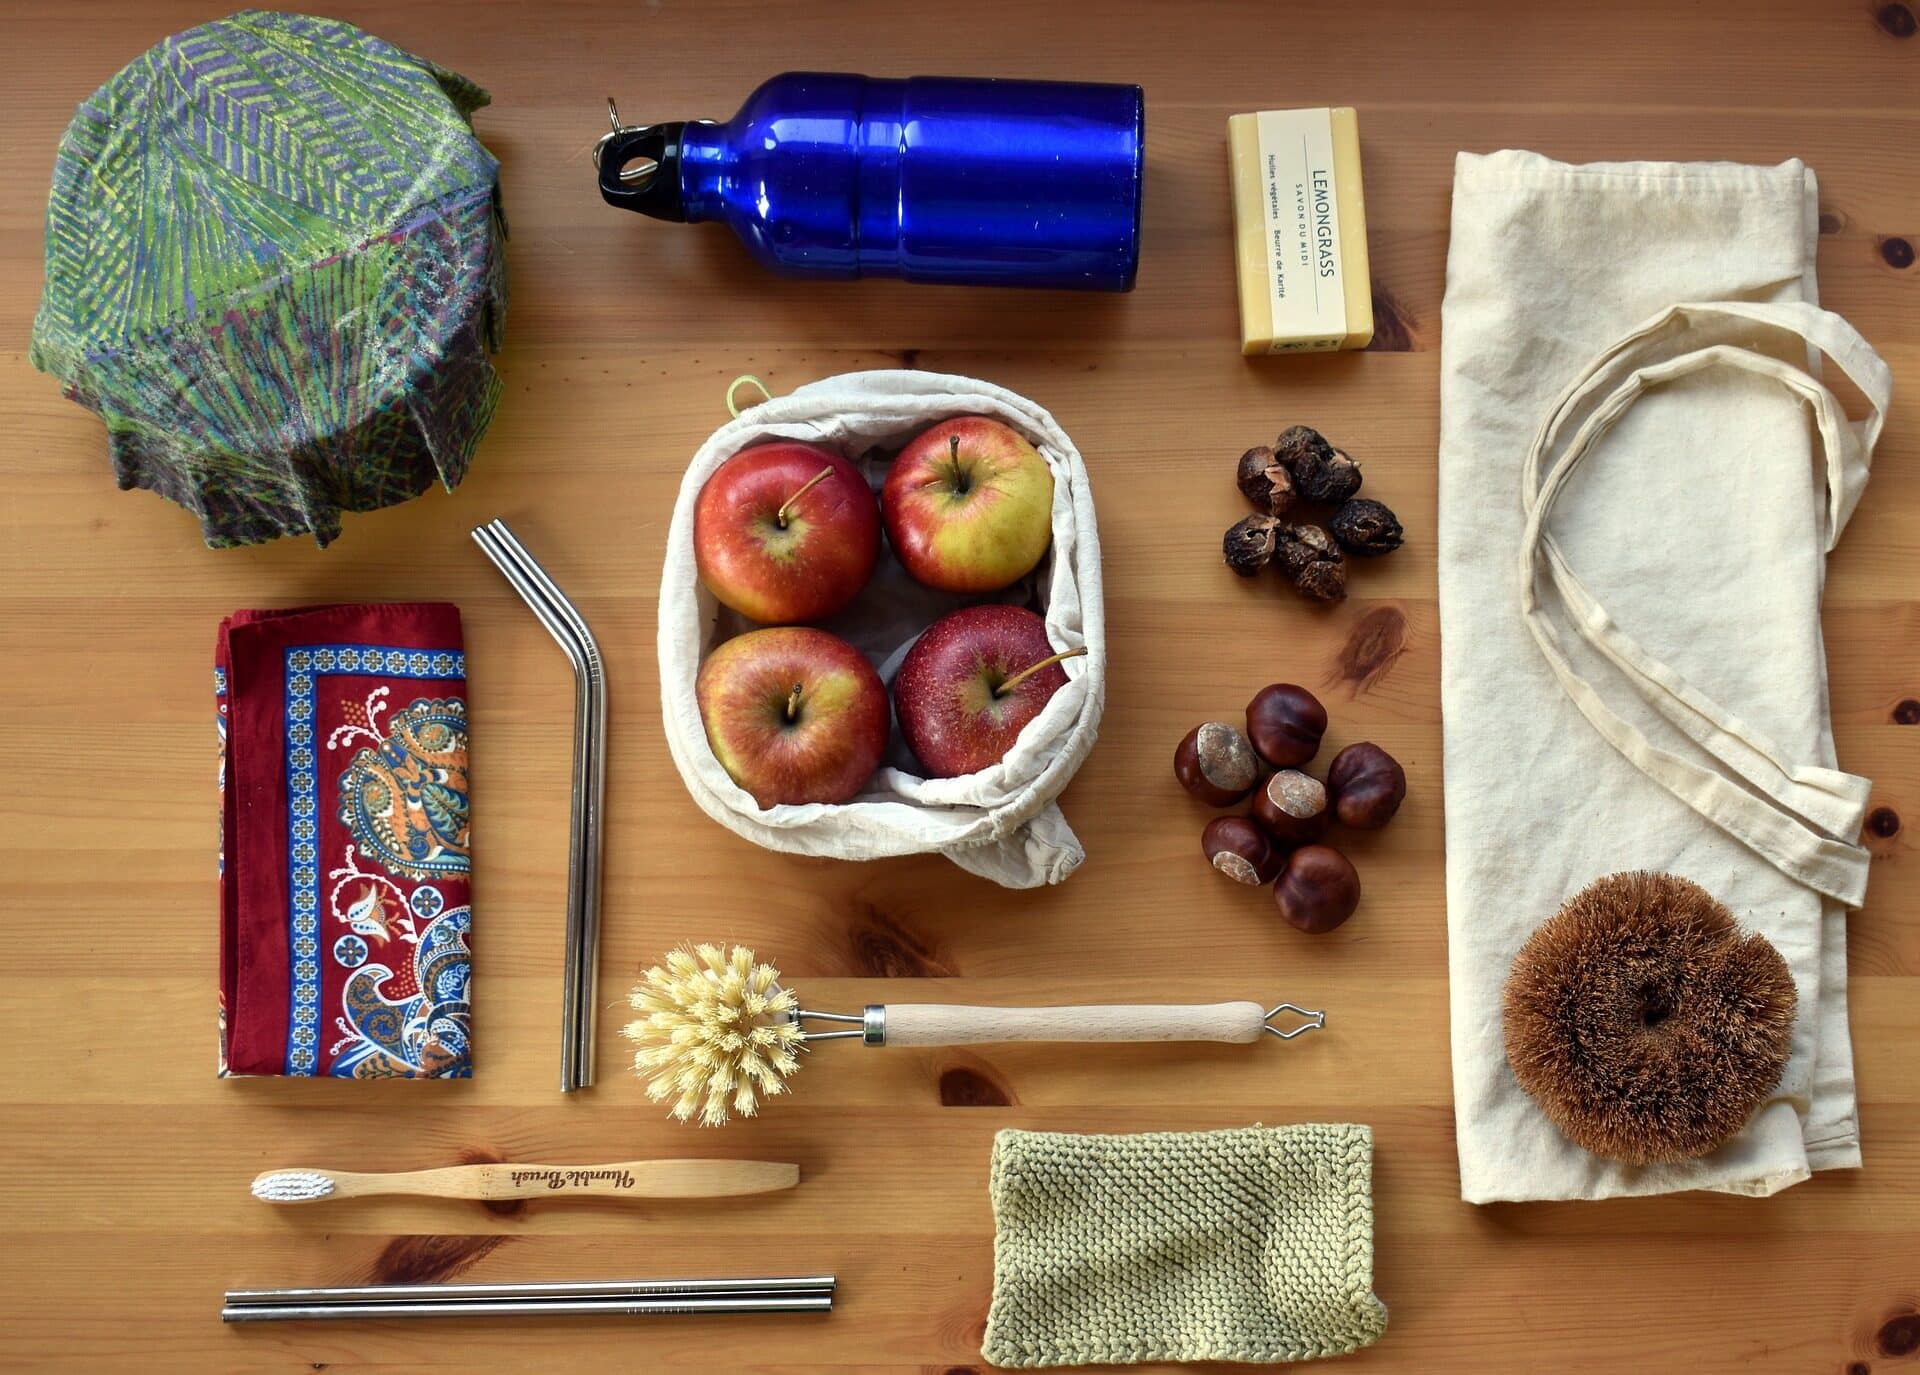 Image: reusable items to help a person live a more zero waste lifestyle